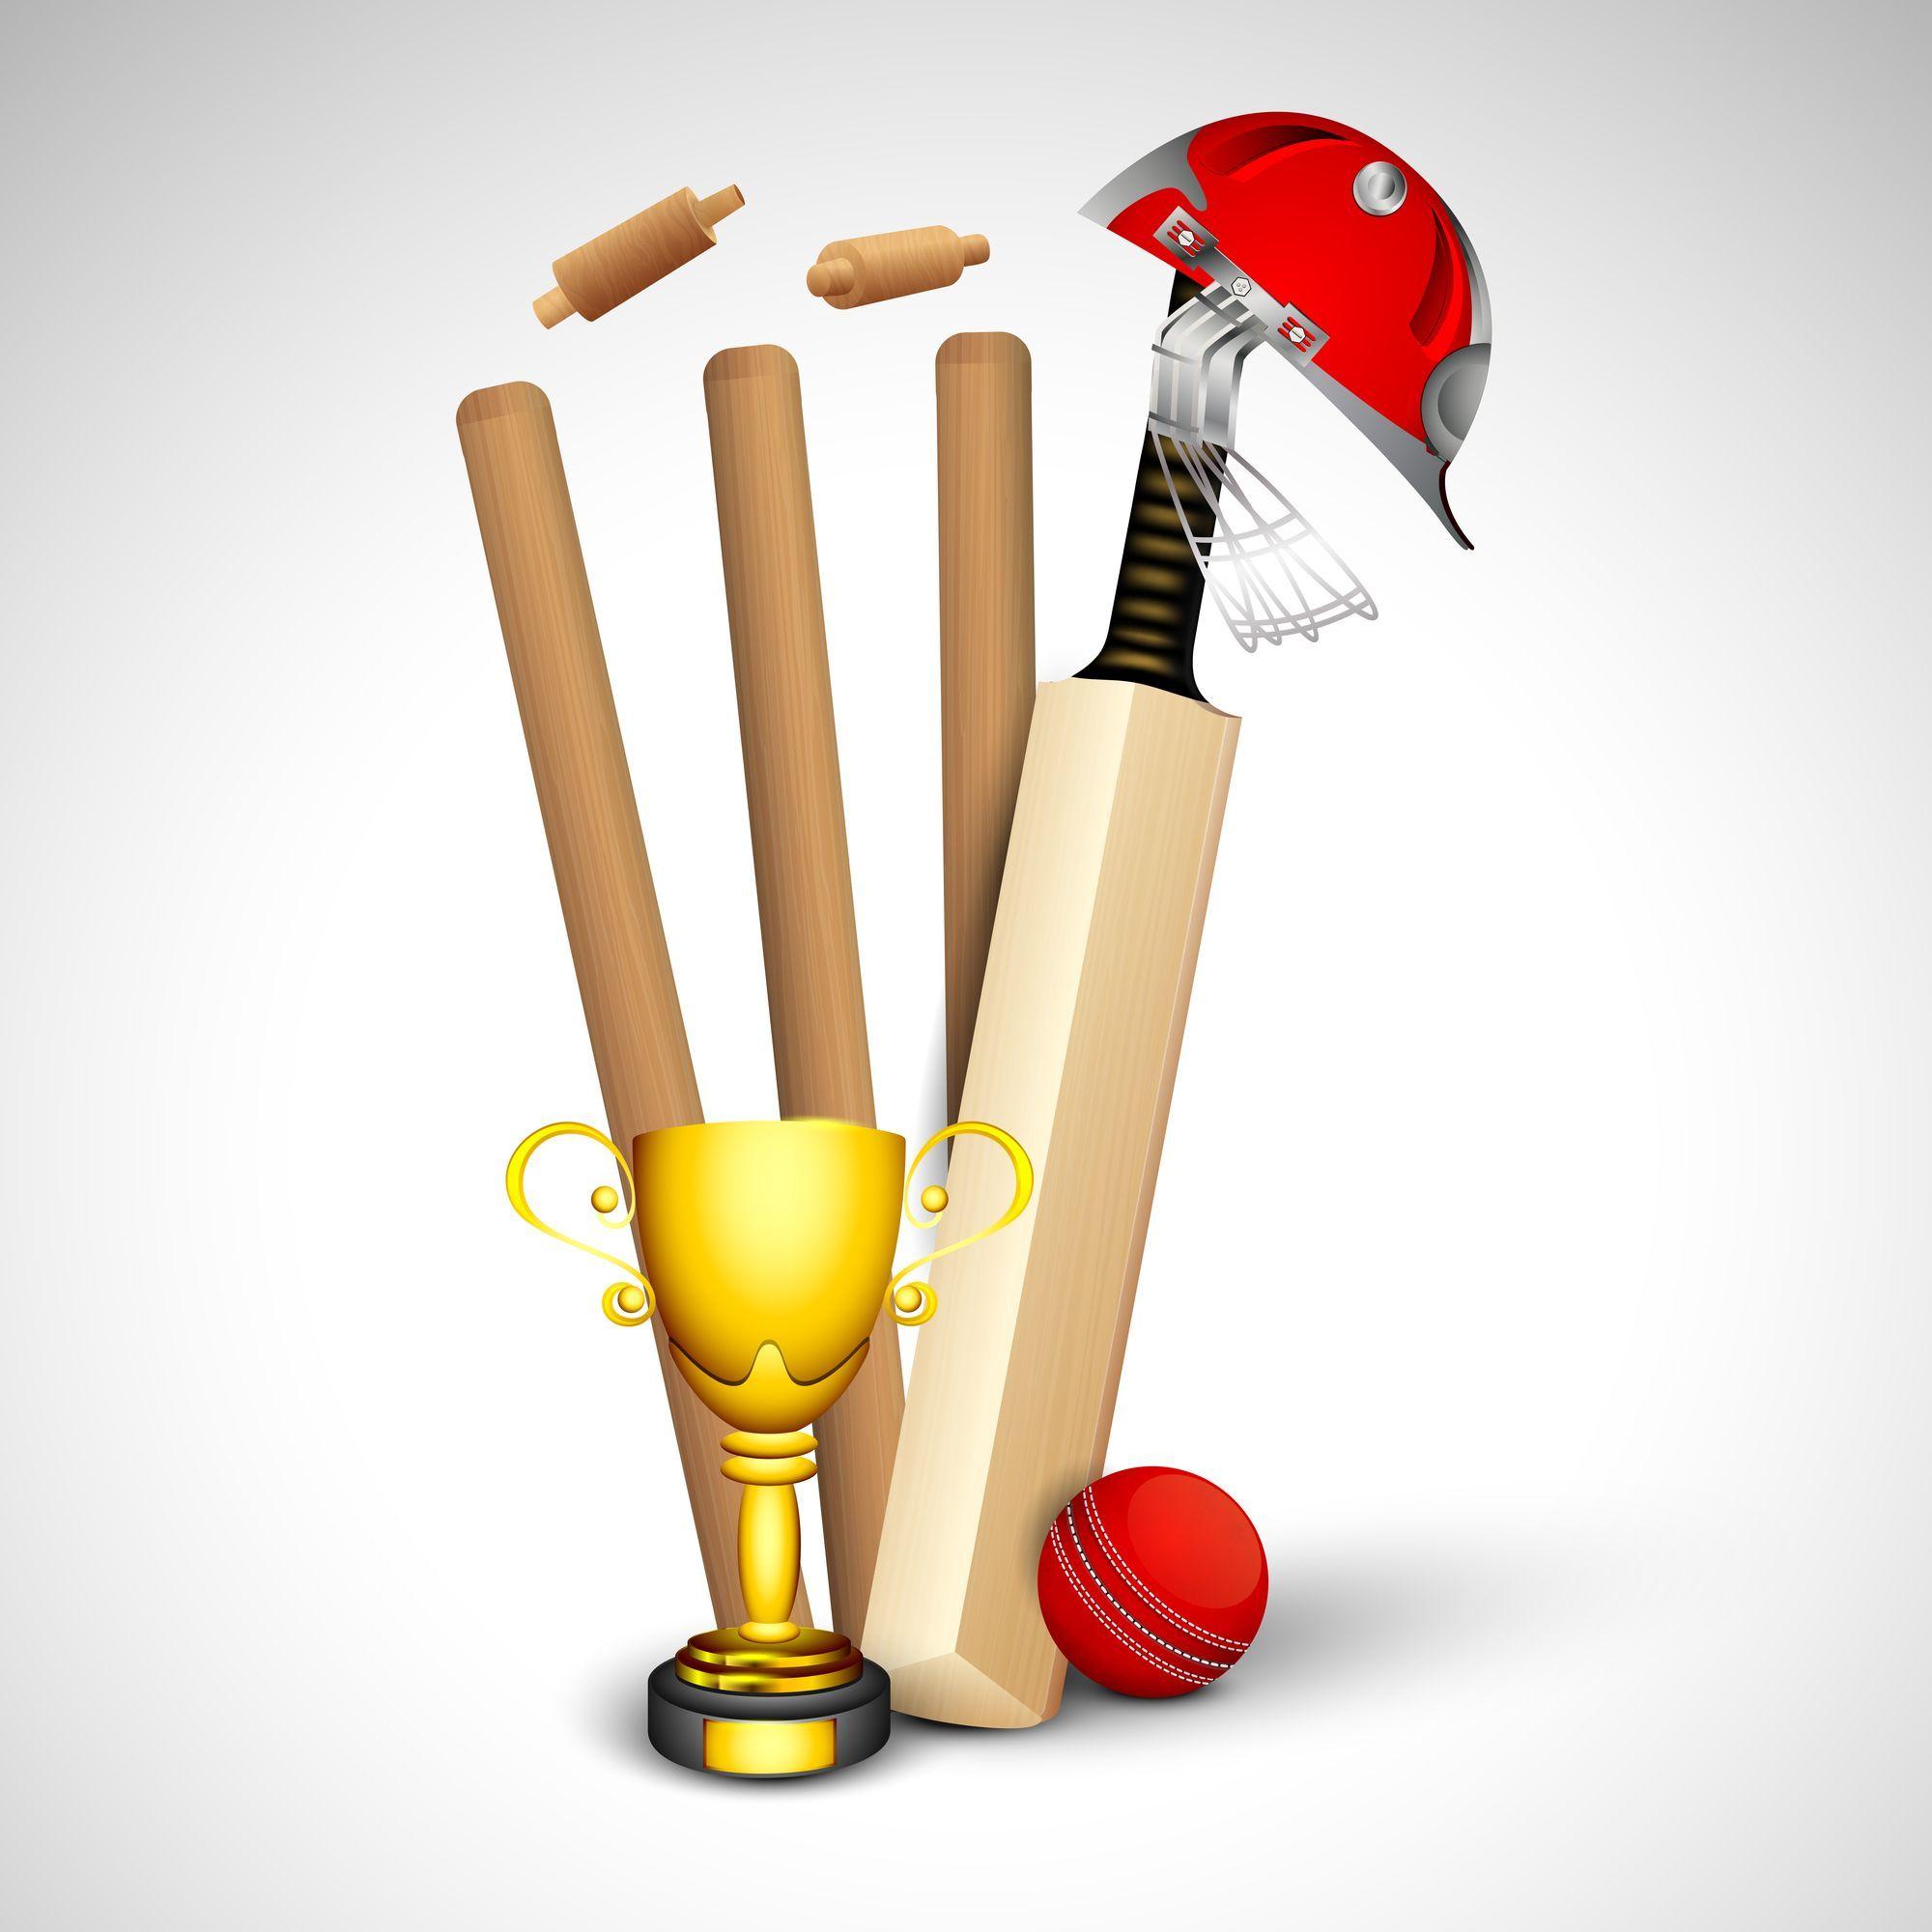 Cricket Bat Logo - Abstract sports concept with cricket ball on wicket stumps ...